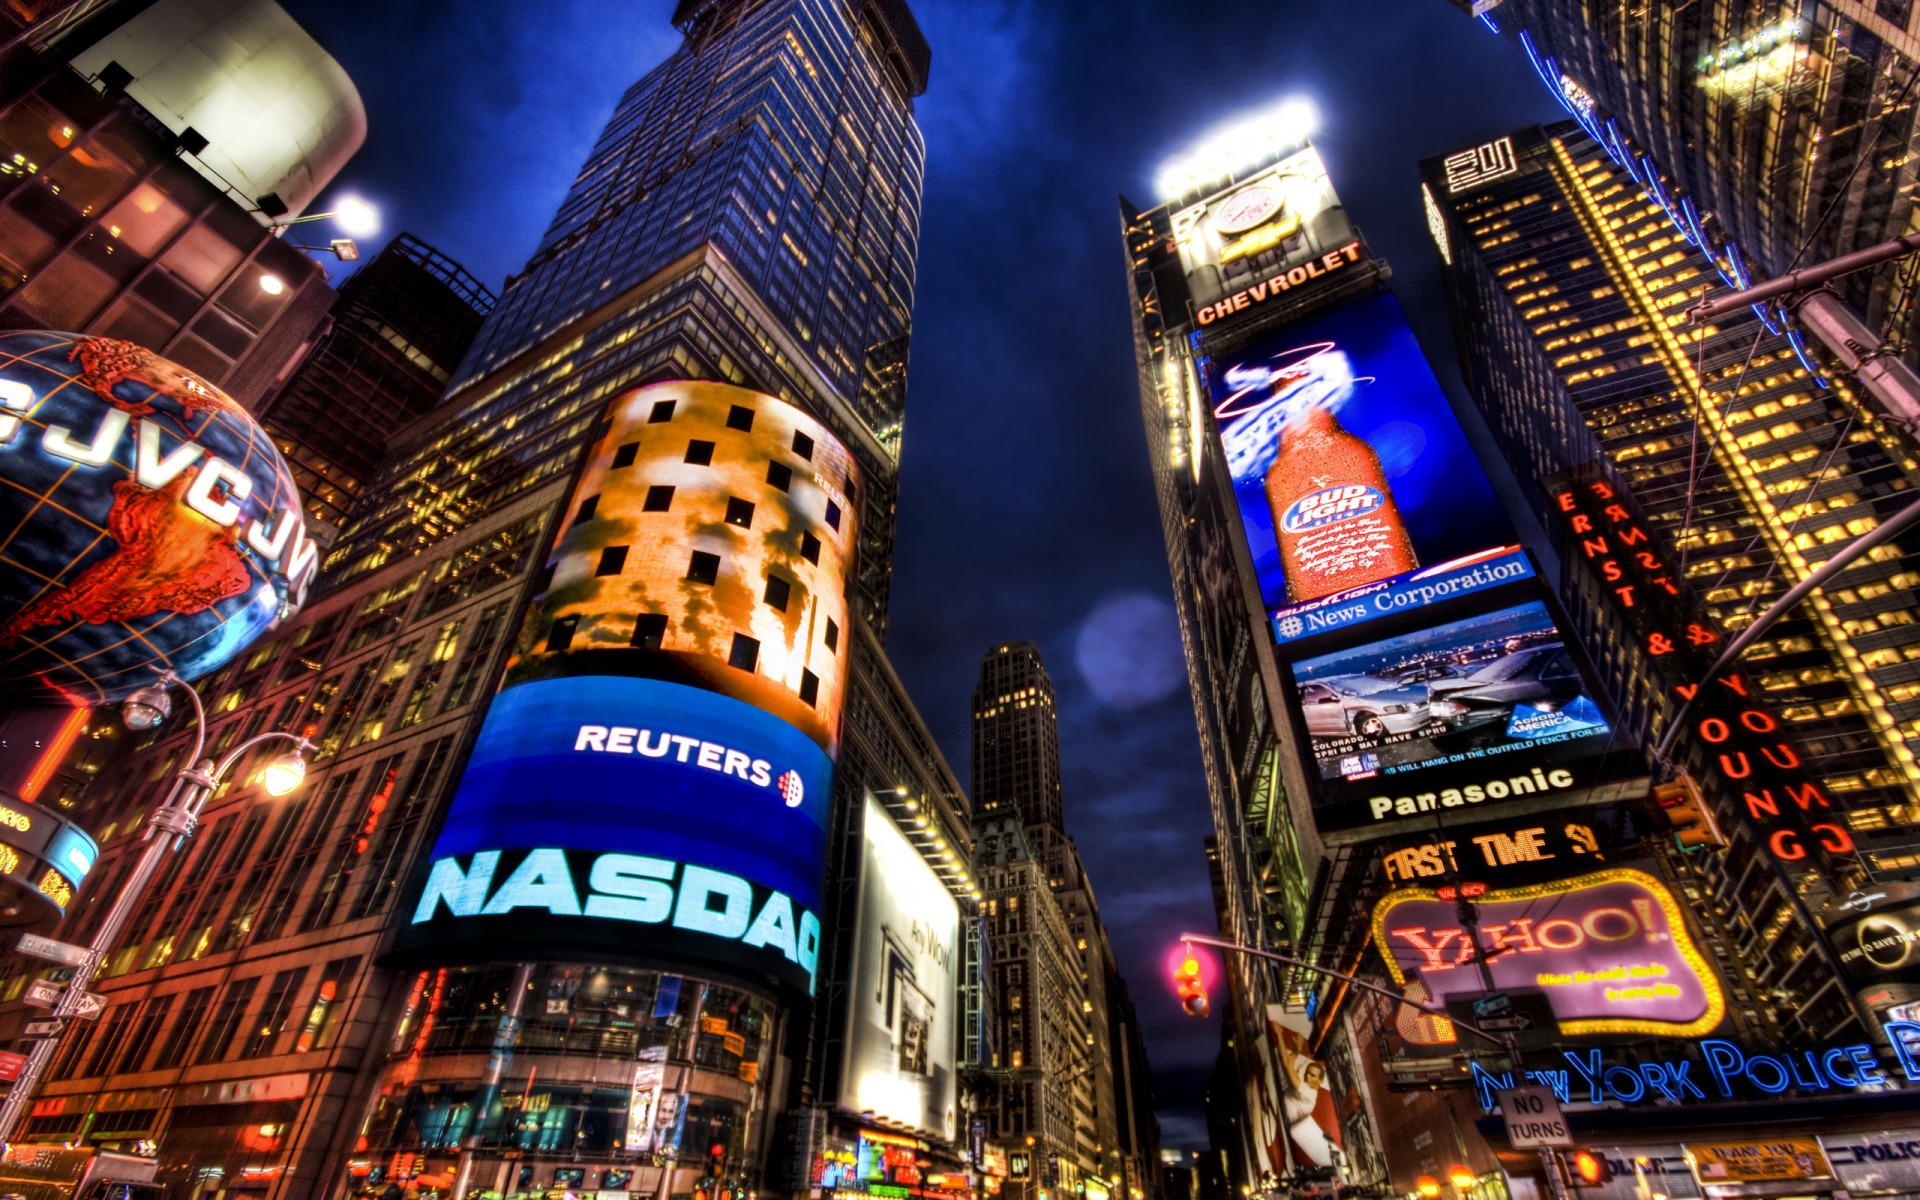 cityscapes, urban, buildings, New York City, Times Square, modern, cities - desktop wallpaper